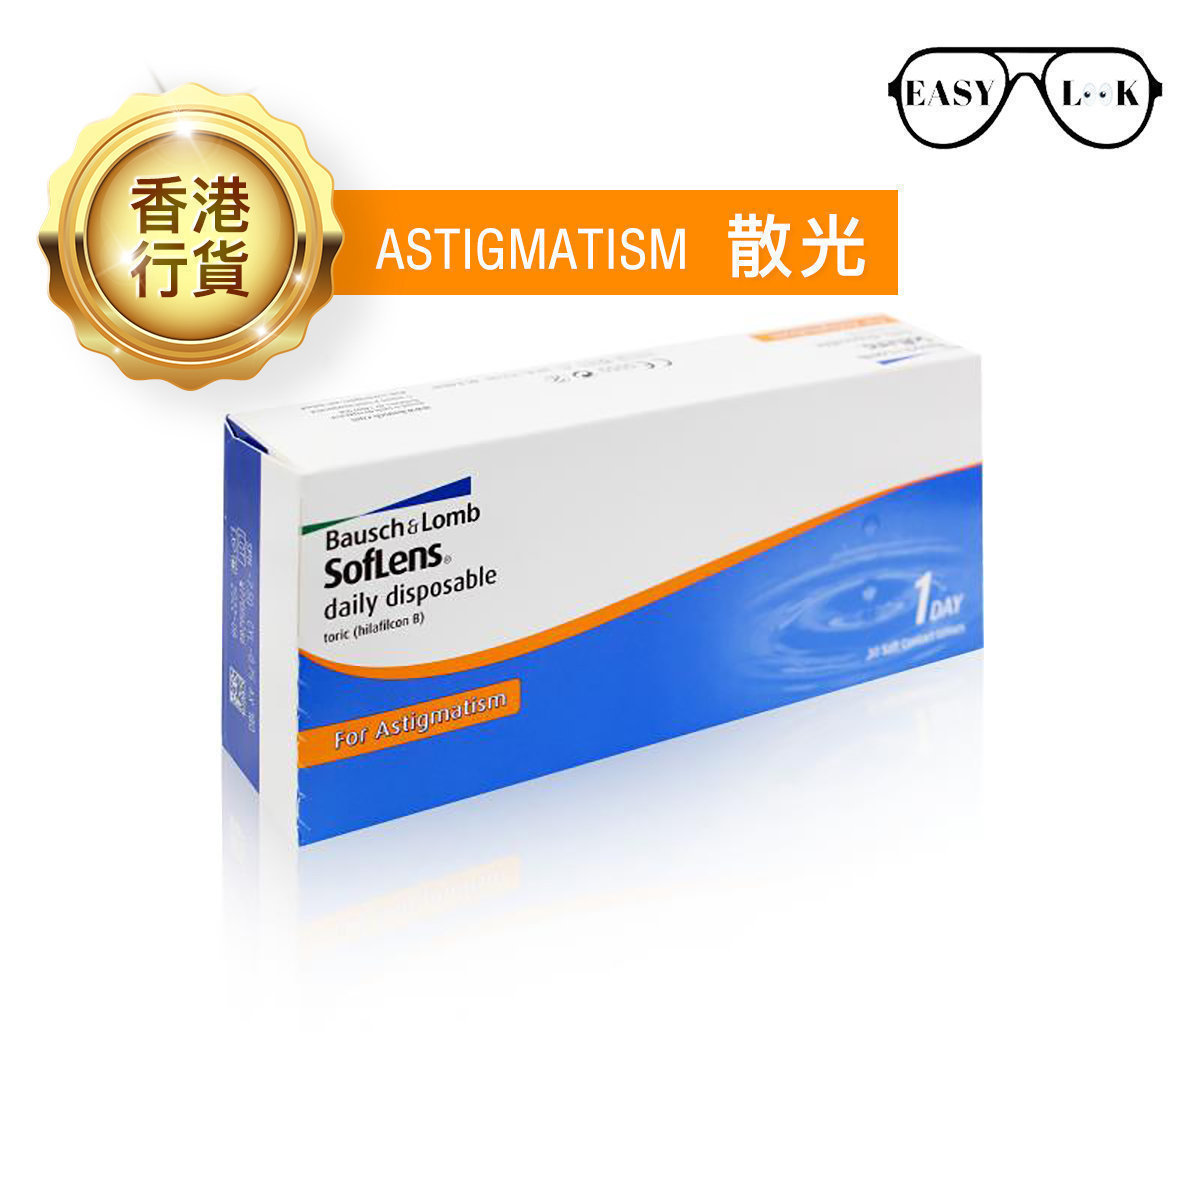 SofLens Daily Disposable for Astigmatism 1-Day Contact Lens